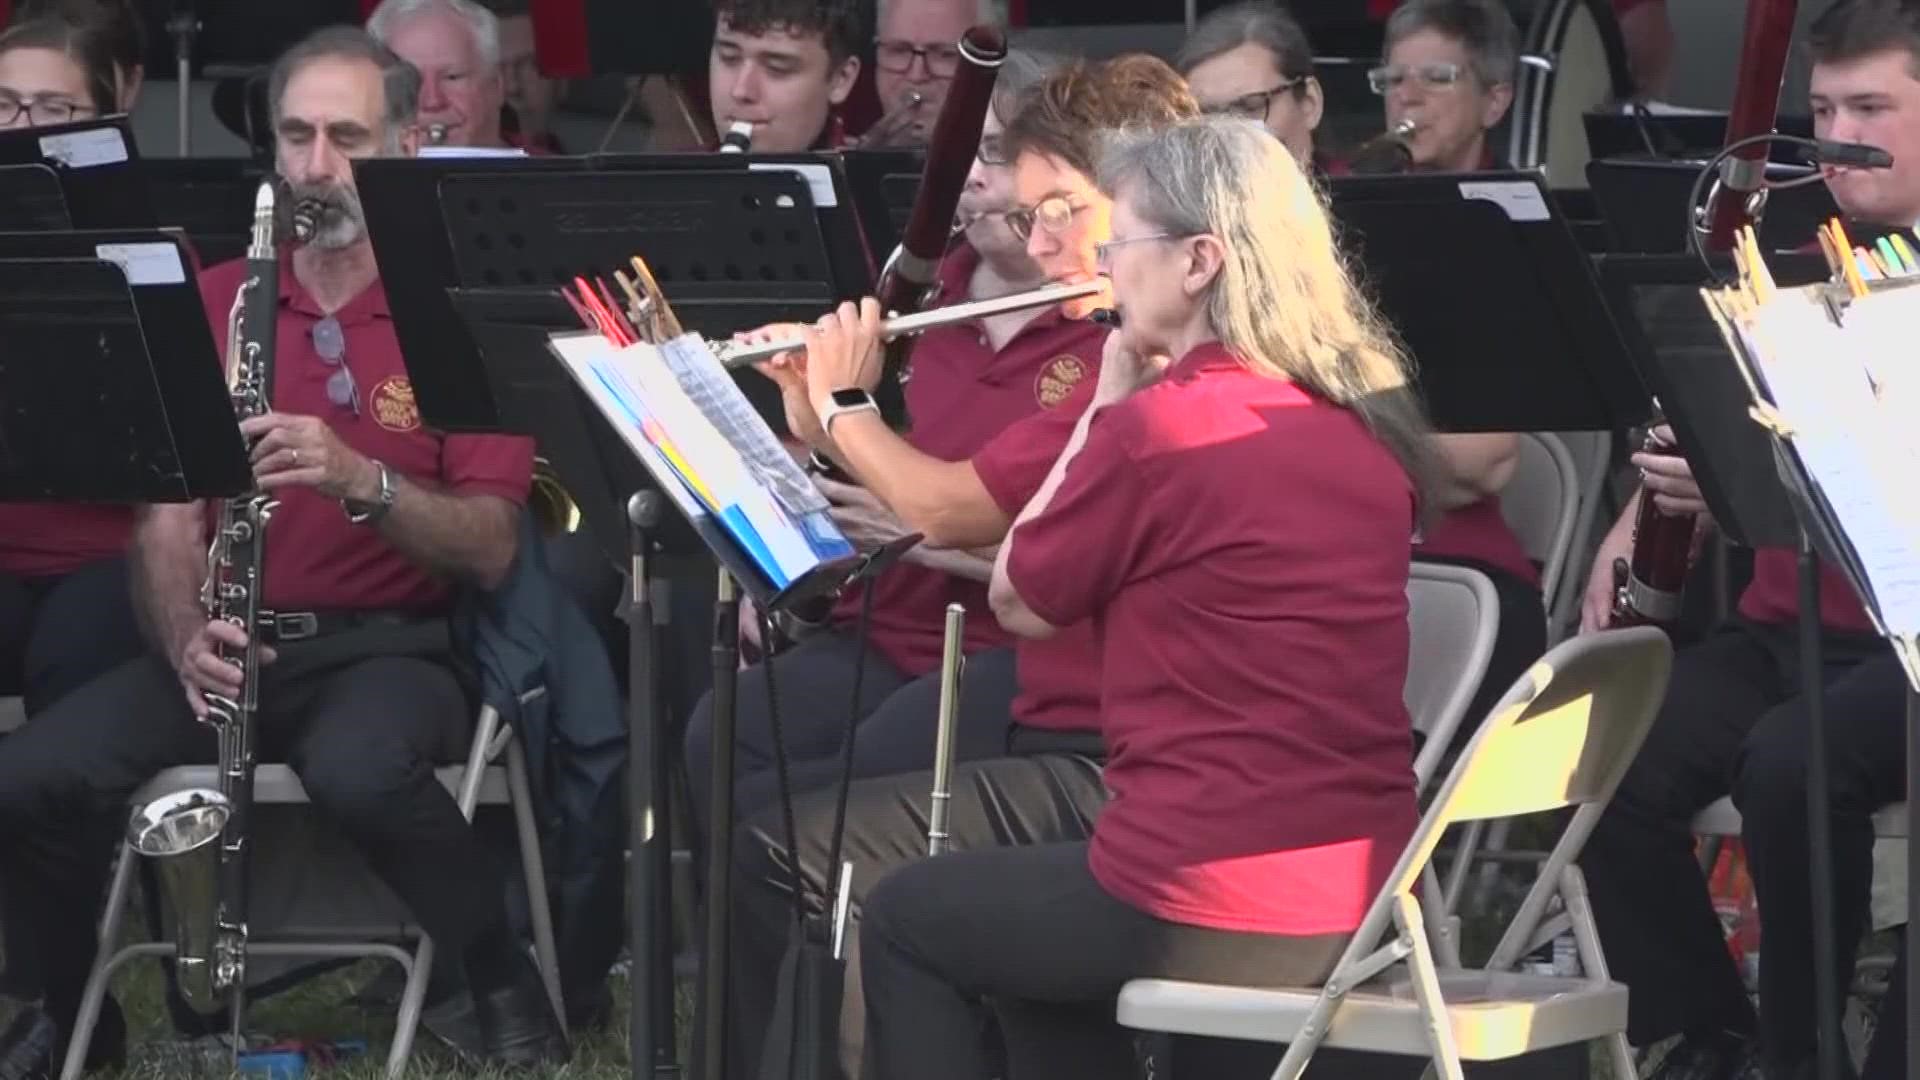 It was in 1859 that the Bangor Band got its start. Since then, the band has played for everyone from presidents to members of the Greater Bangor community.